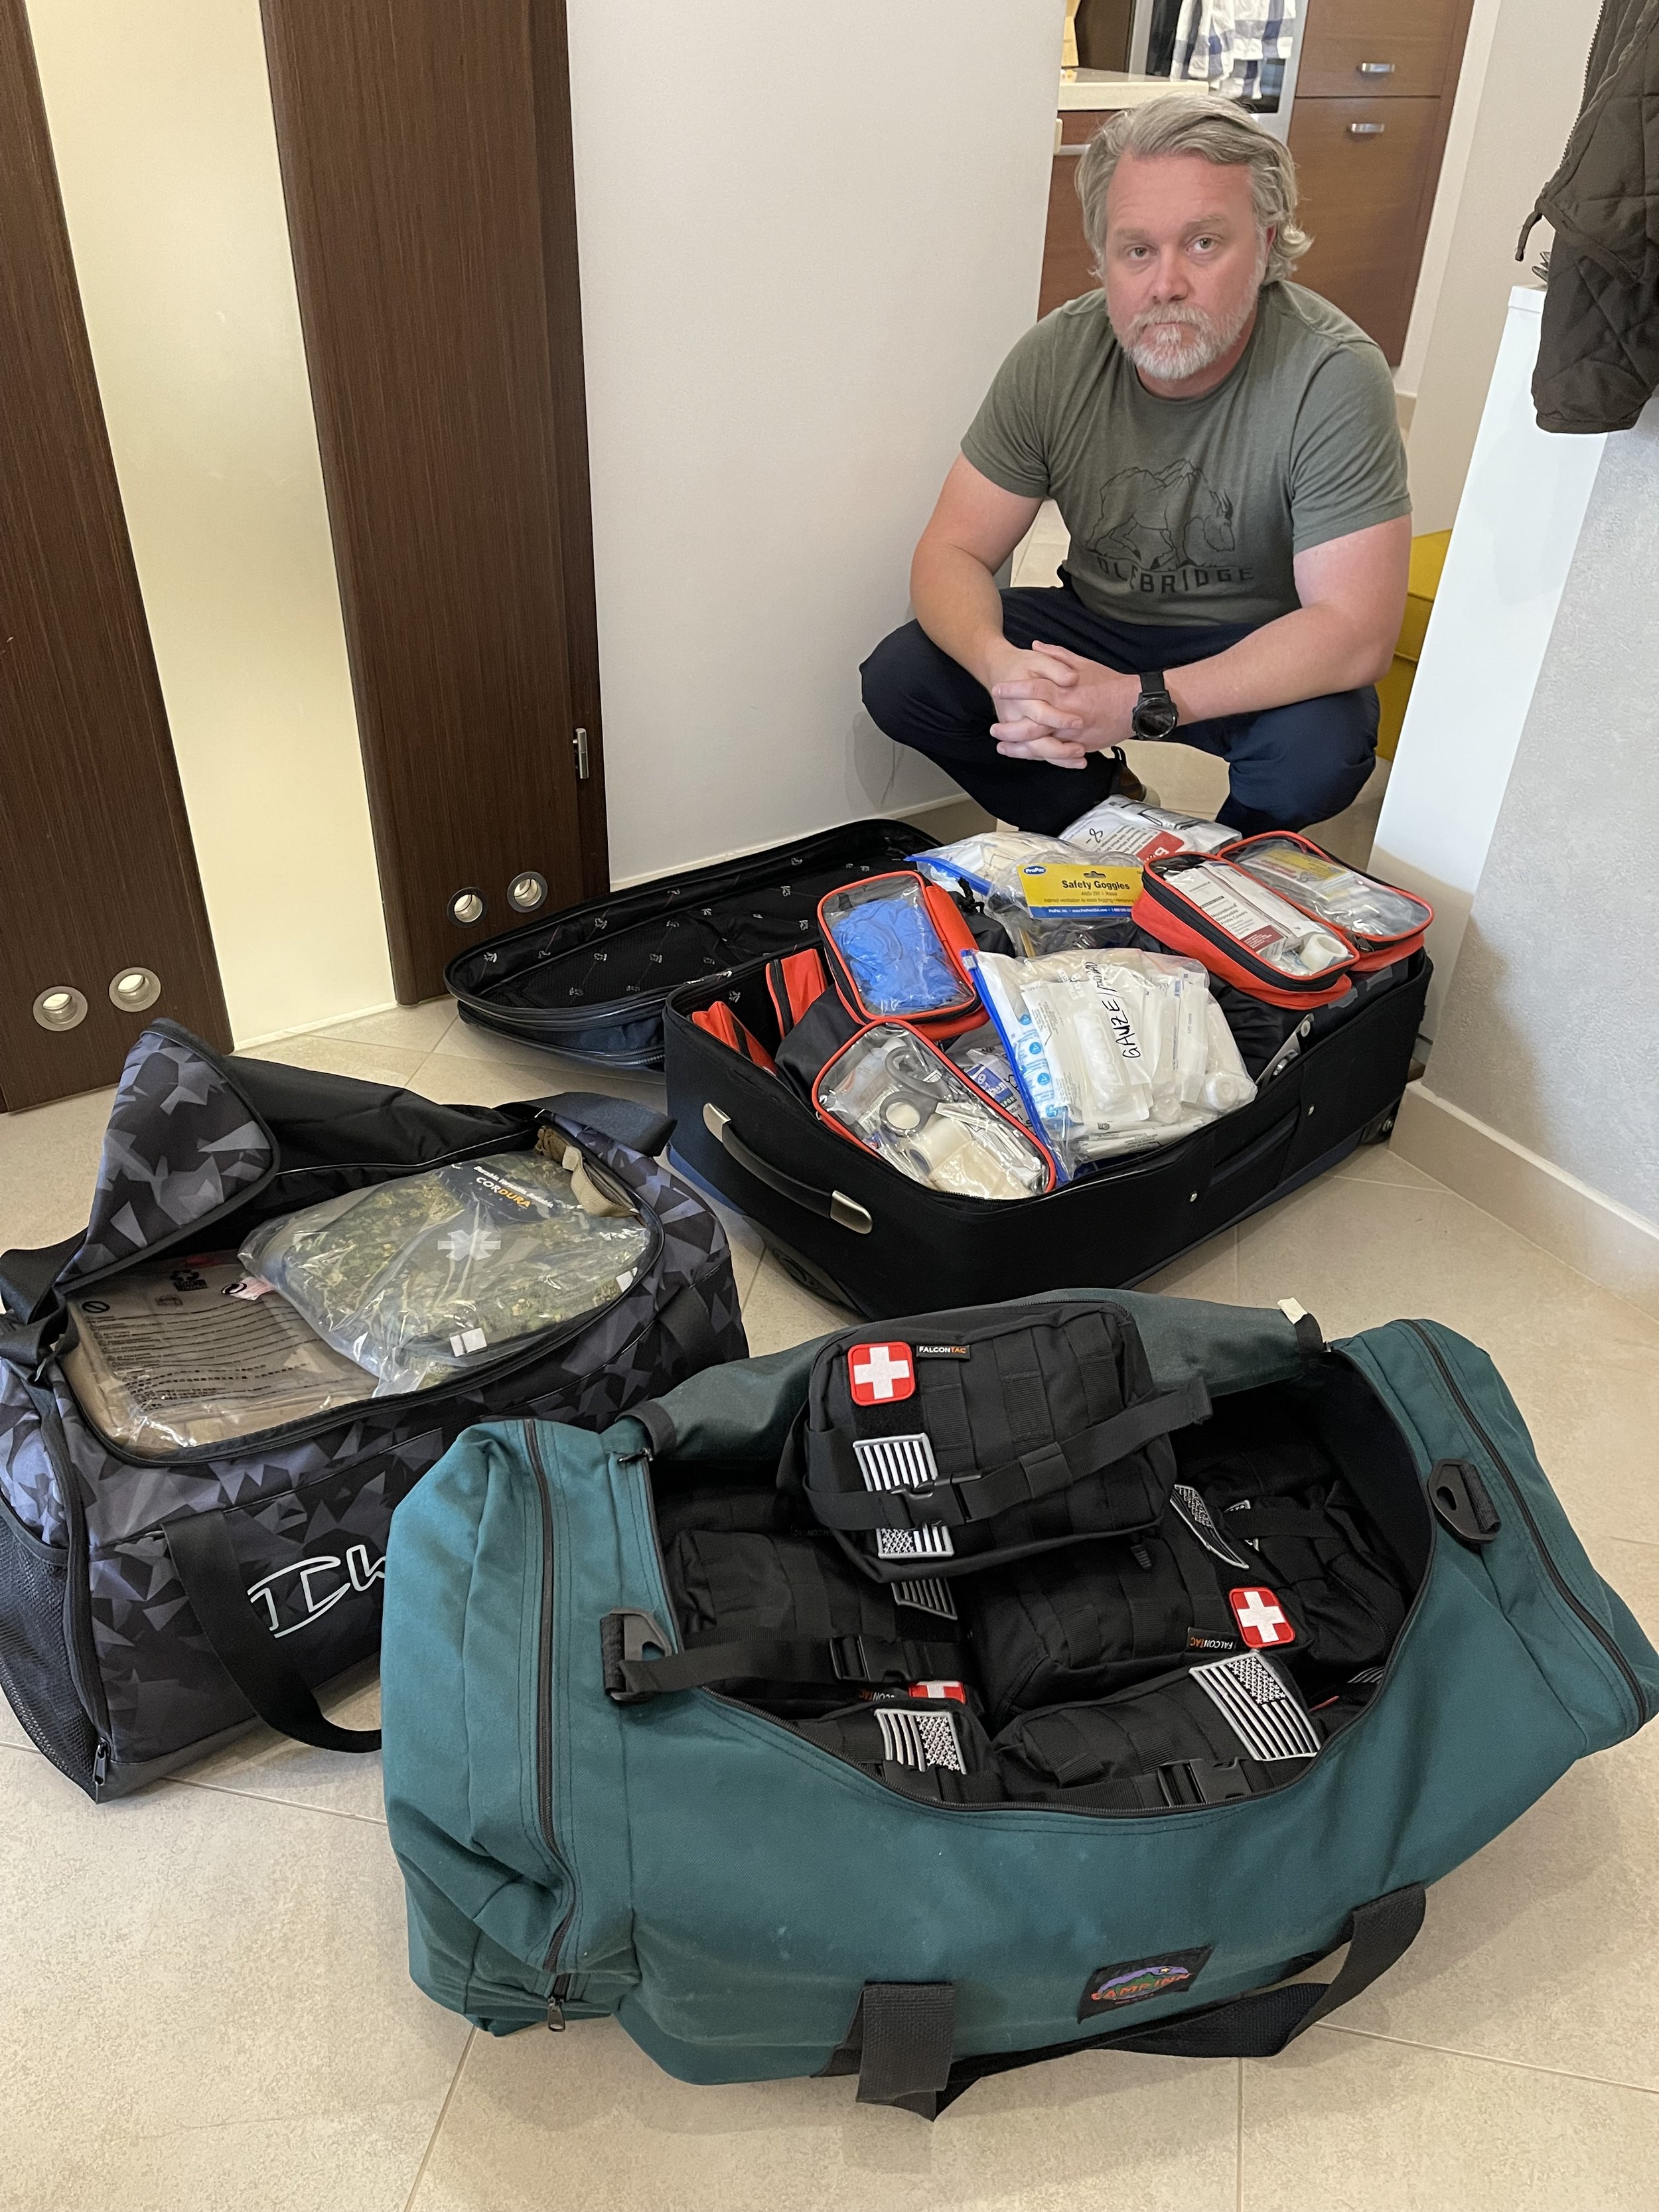 Matt with donated medical supplies and IFAKs